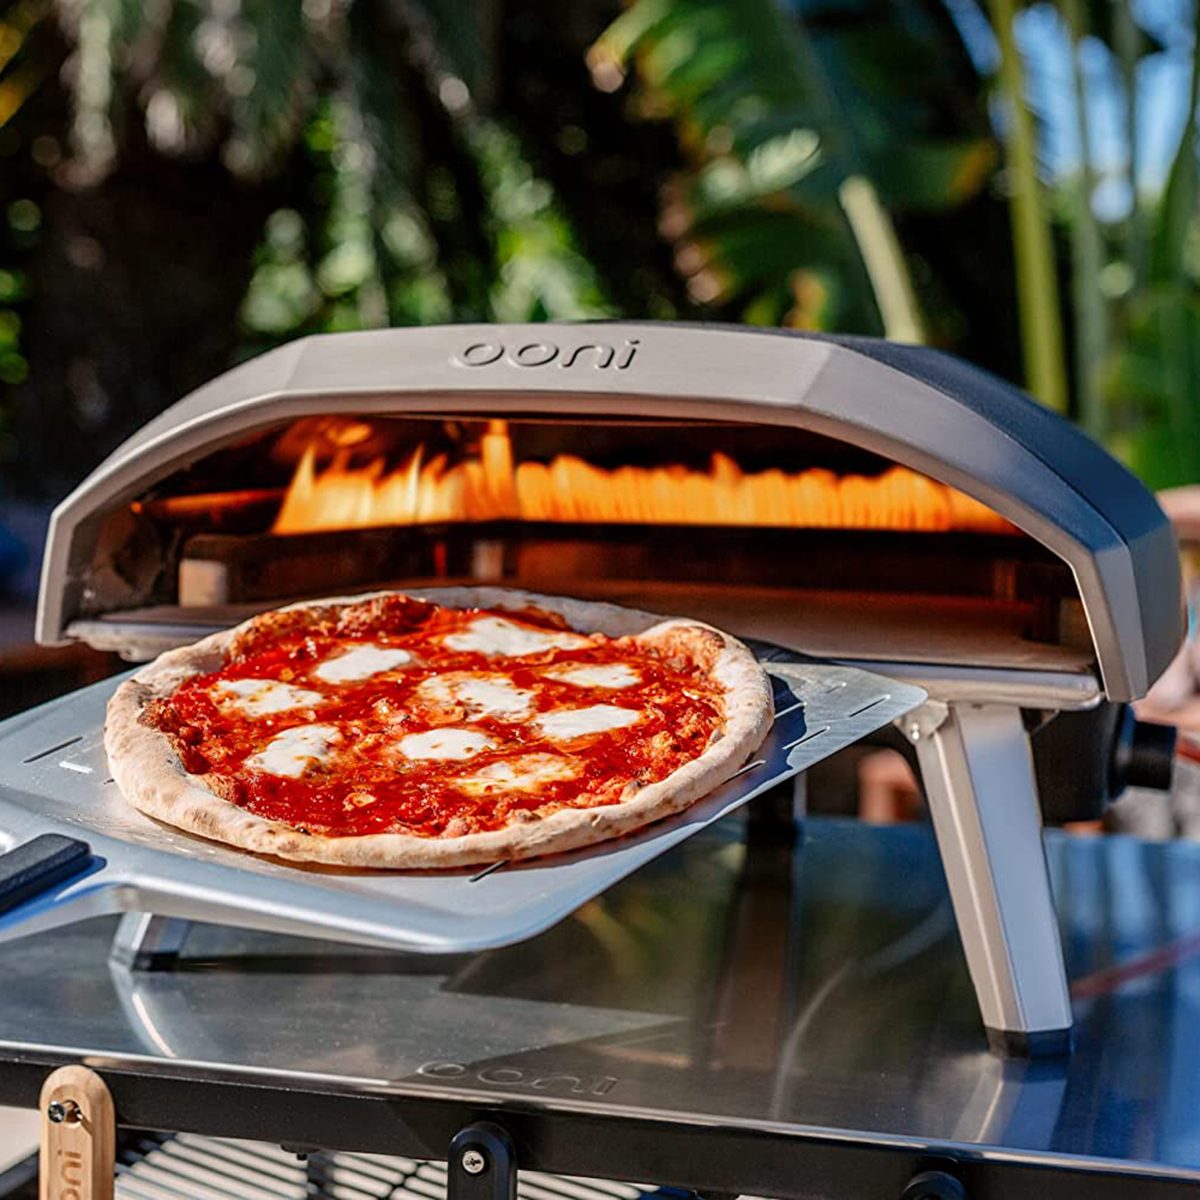 https://www.tasteofhome.com/wp-content/uploads/2023/04/The-6-Best-Pizza-Ovens-on-Amazon-for-a-Restaurant-Quality-Pie-Every-Time_FT_via-amazon.com_.jpg